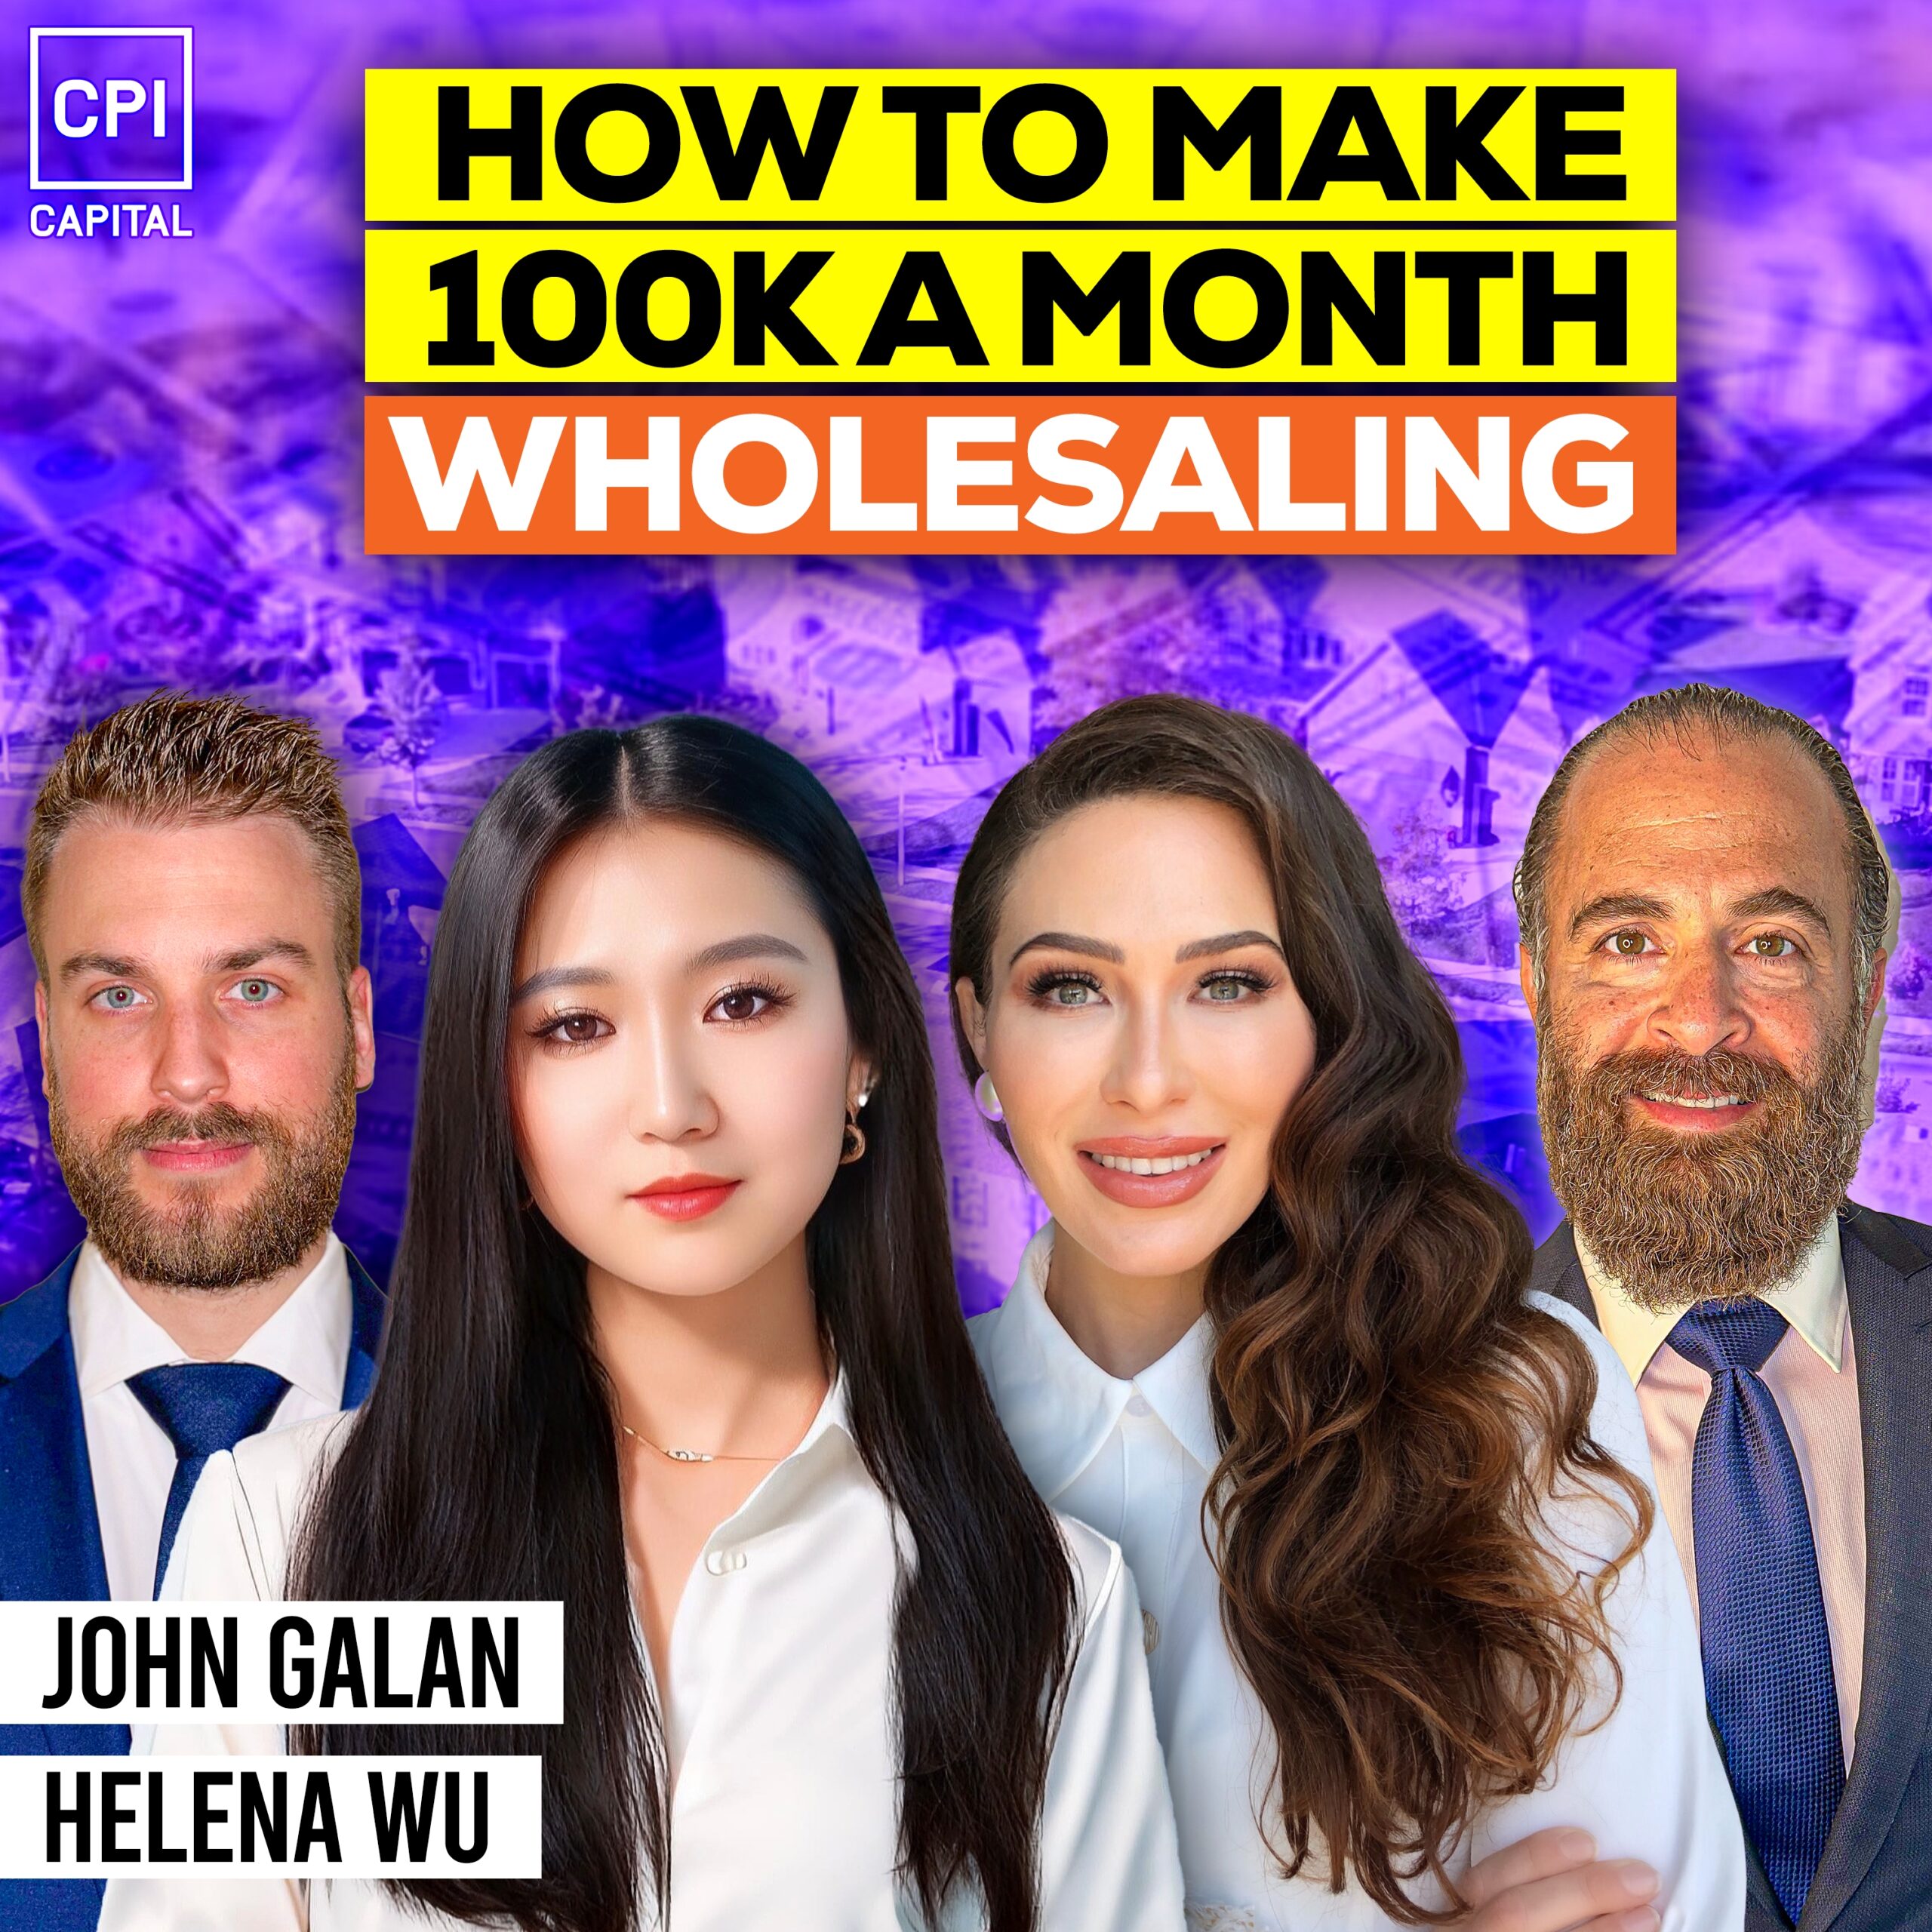 How To Make 100K A Month Wholesaling Real Estate With John Galan And Helena Wu